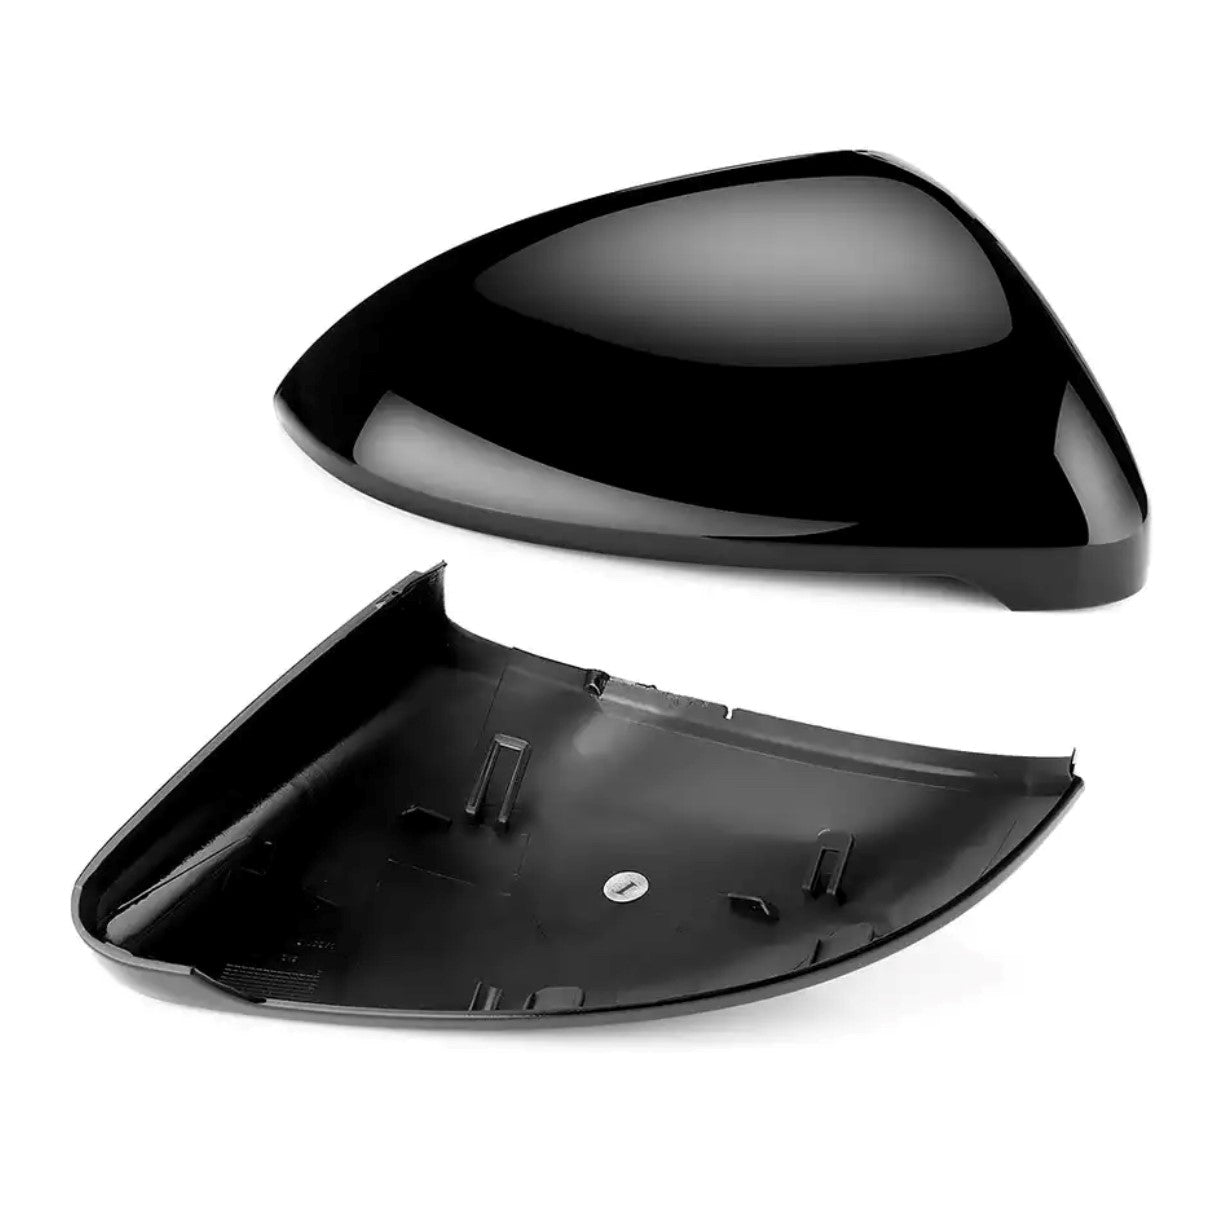 Wing Rearview Mirror Covers Cap for Volkswage VW GTI Golf MK7 E